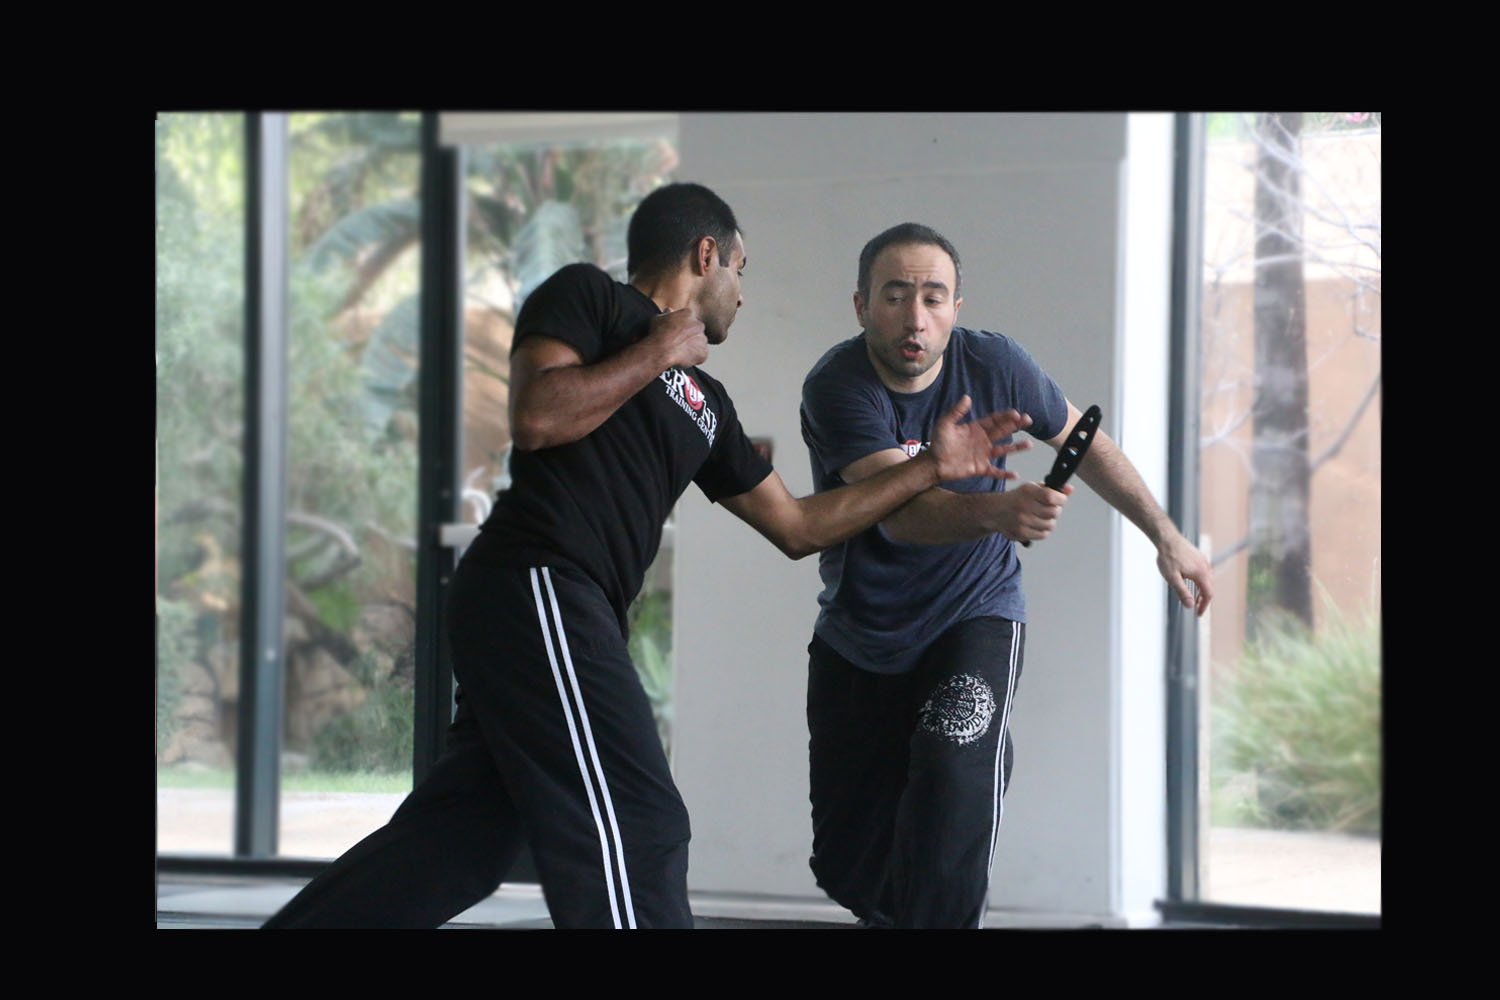 5 facts about krav maga self-defense classes cover